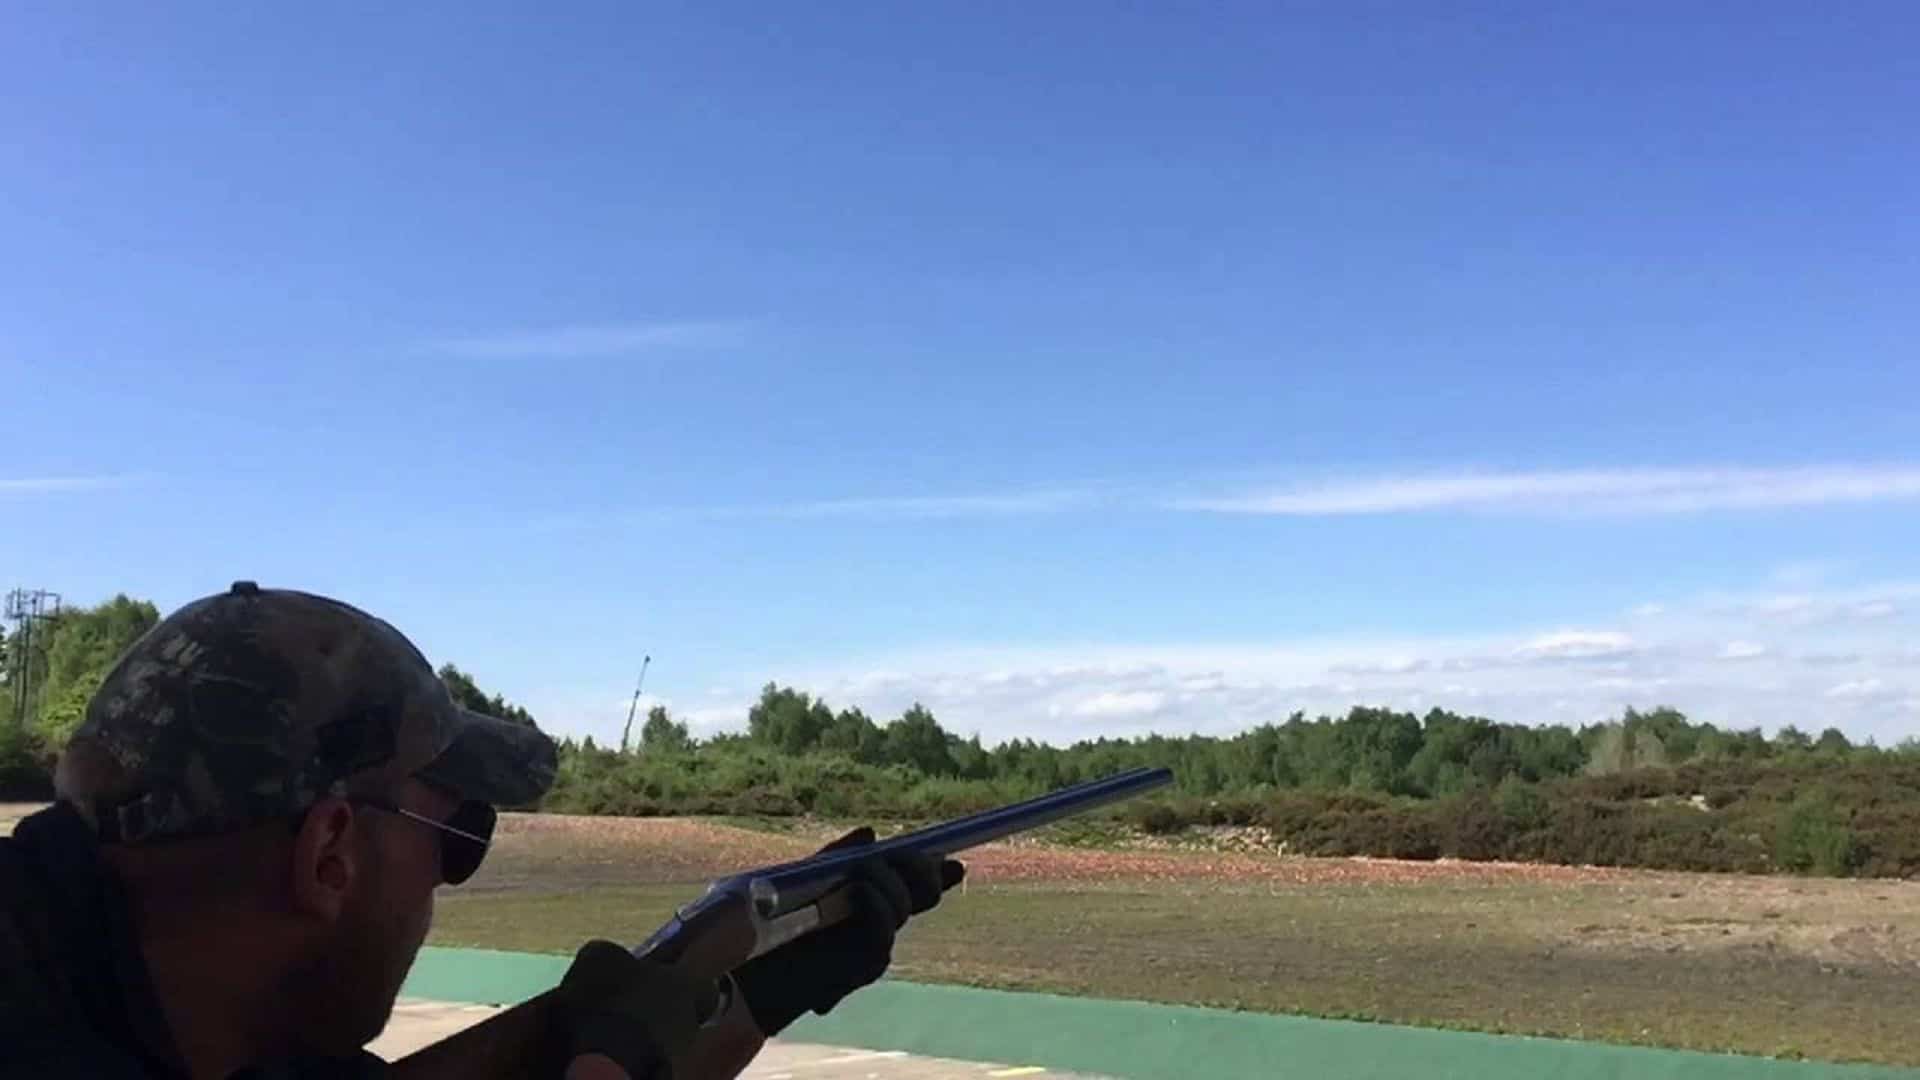 The National Clay Shooting Centre in UK